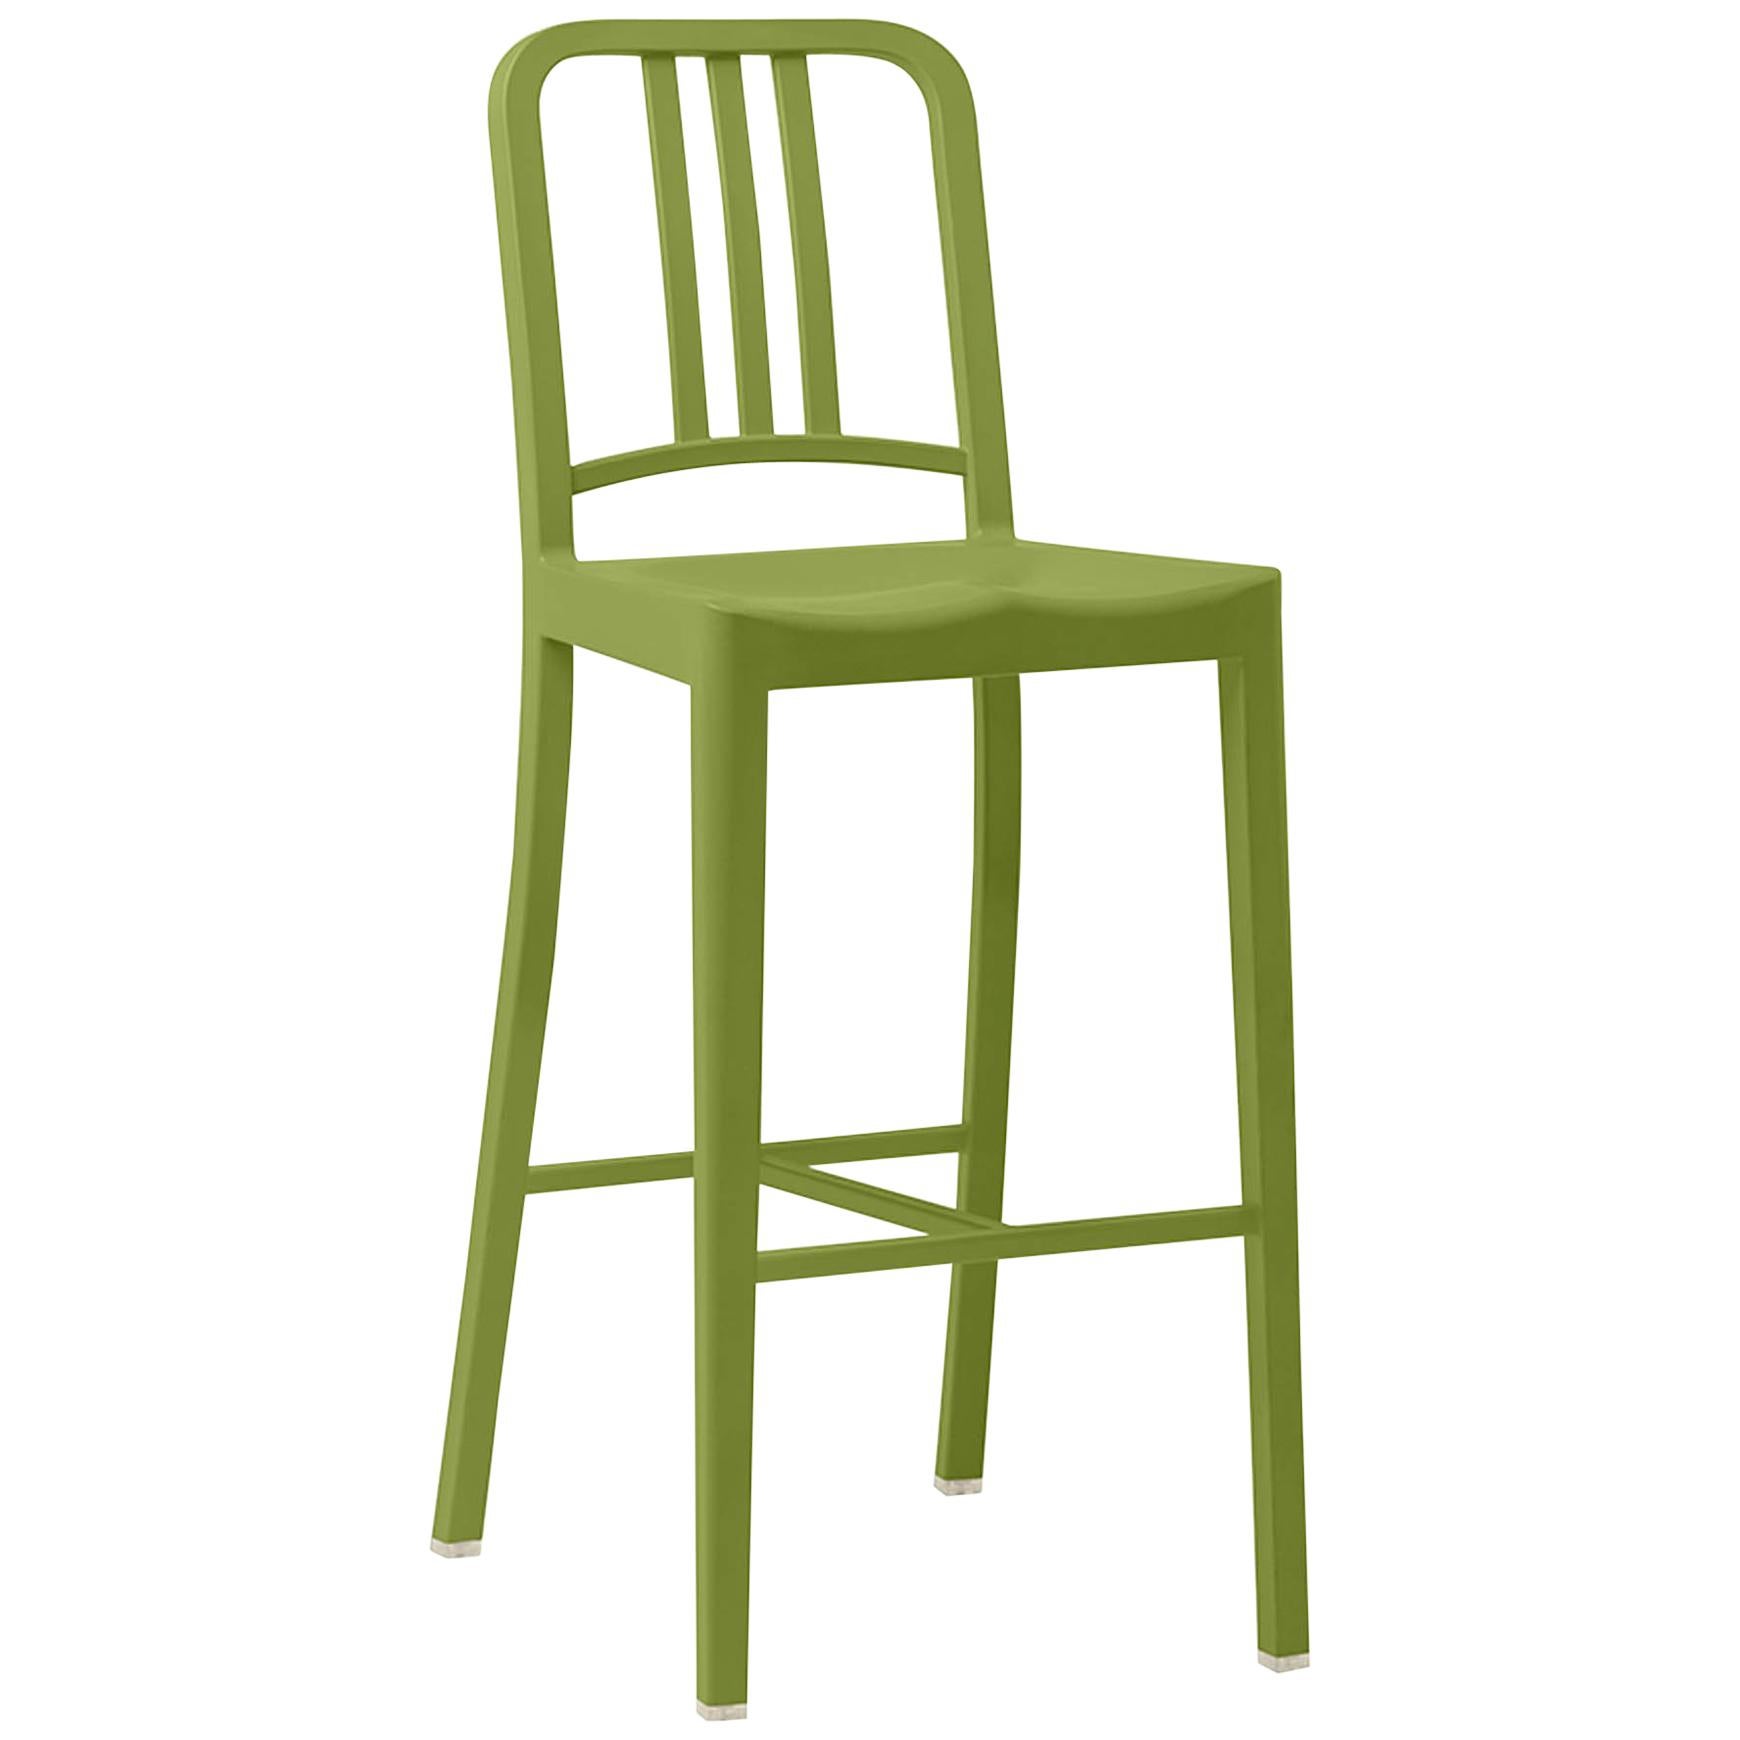 Emeco 111 Navy Barstool in Grass by Coca-Cola For Sale